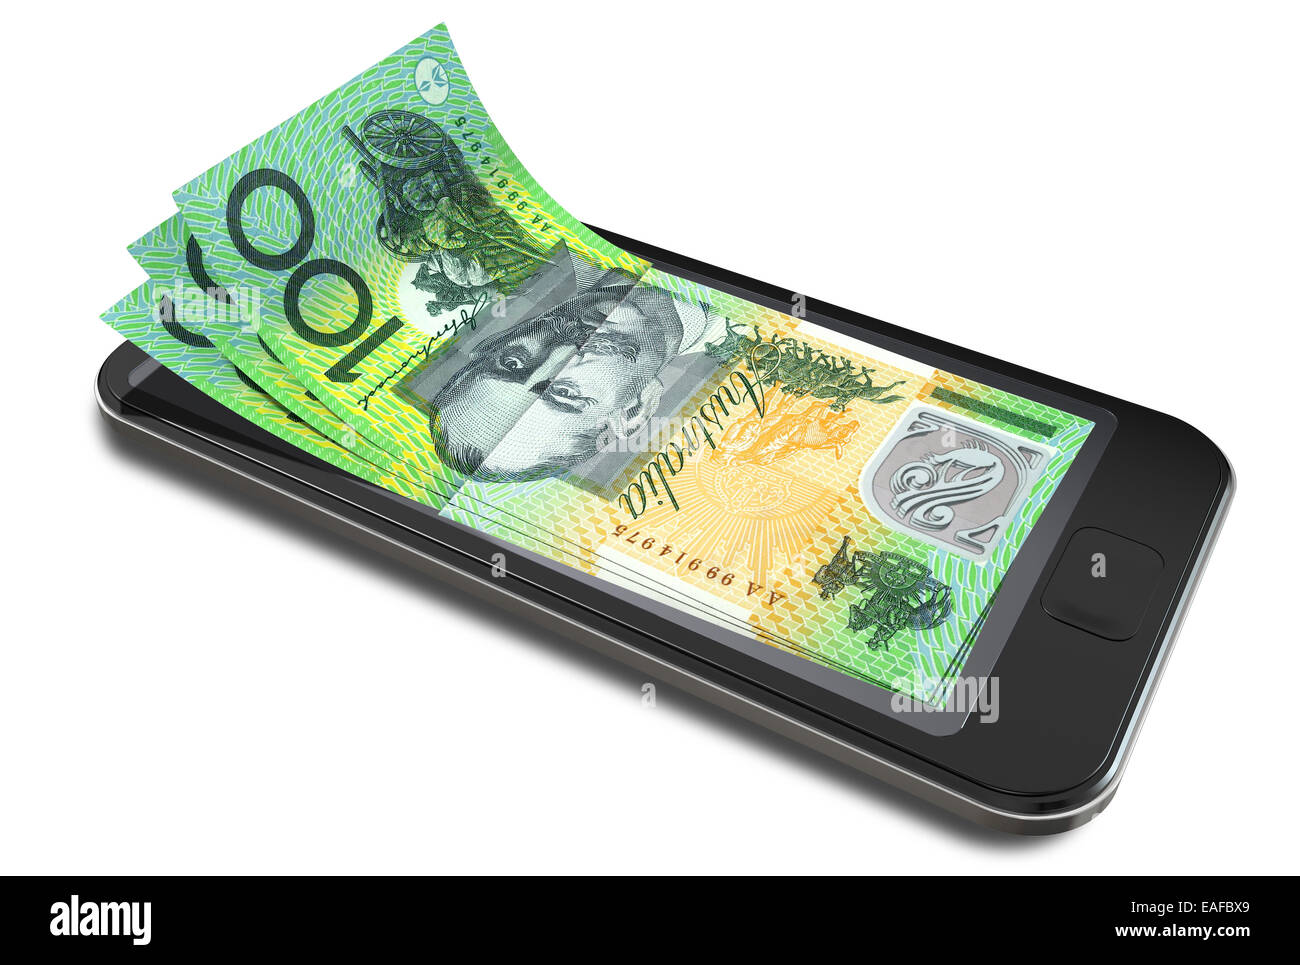 A concept image of a generic smart phone with digital on screen money changing into real australian dollar banknotes signifying Stock Photo